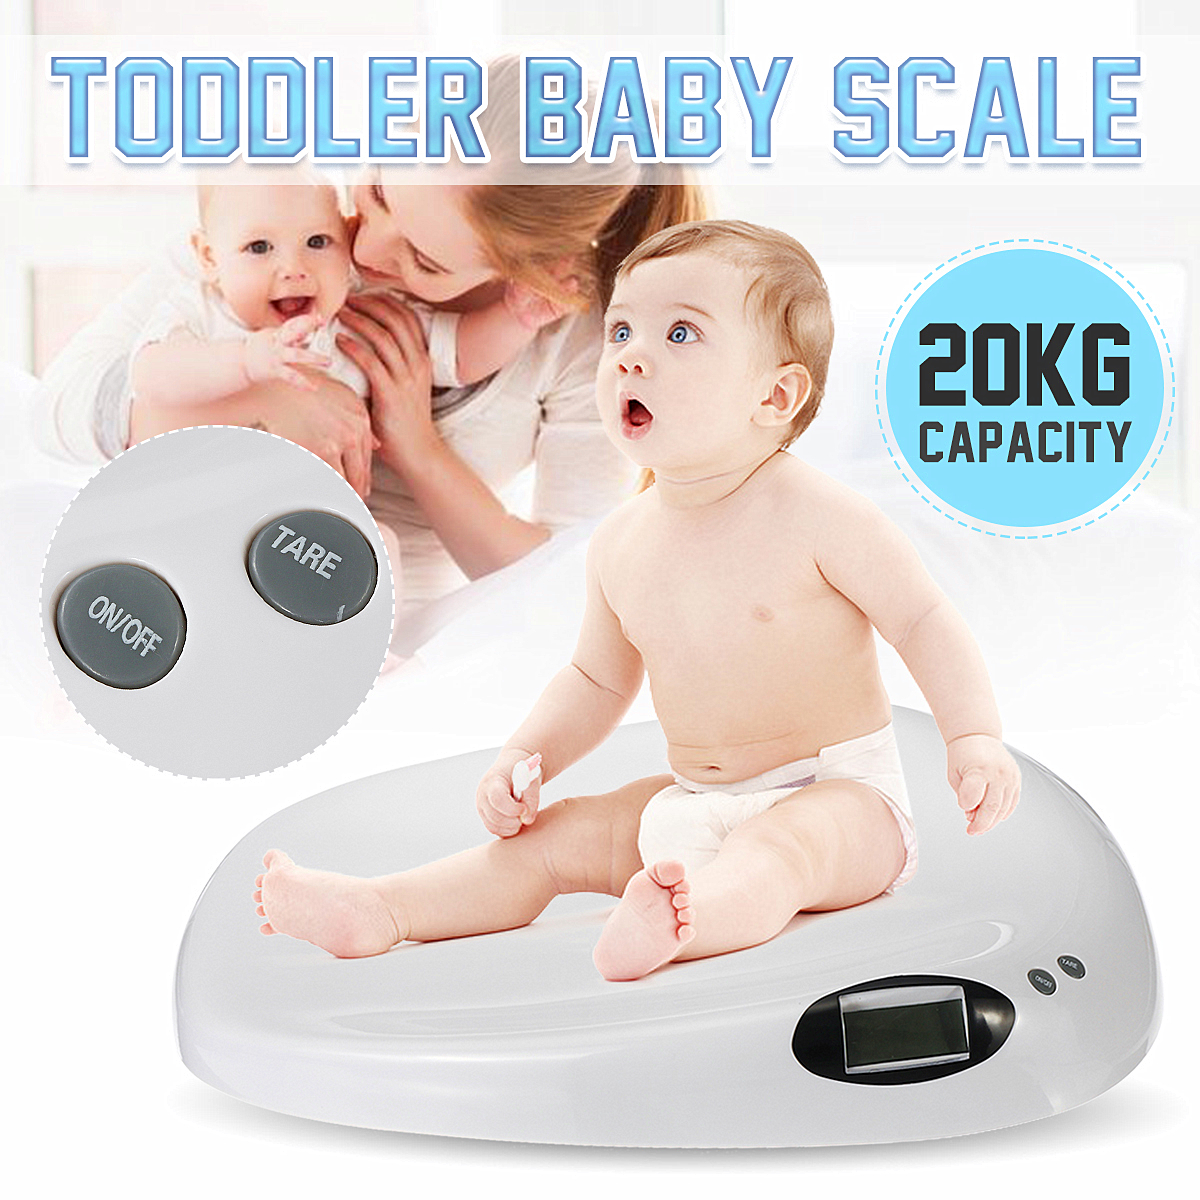 20kg44lb-Toddler-Baby-Scale-Digital-Pet-Scale-LCD-Display-1625678-1